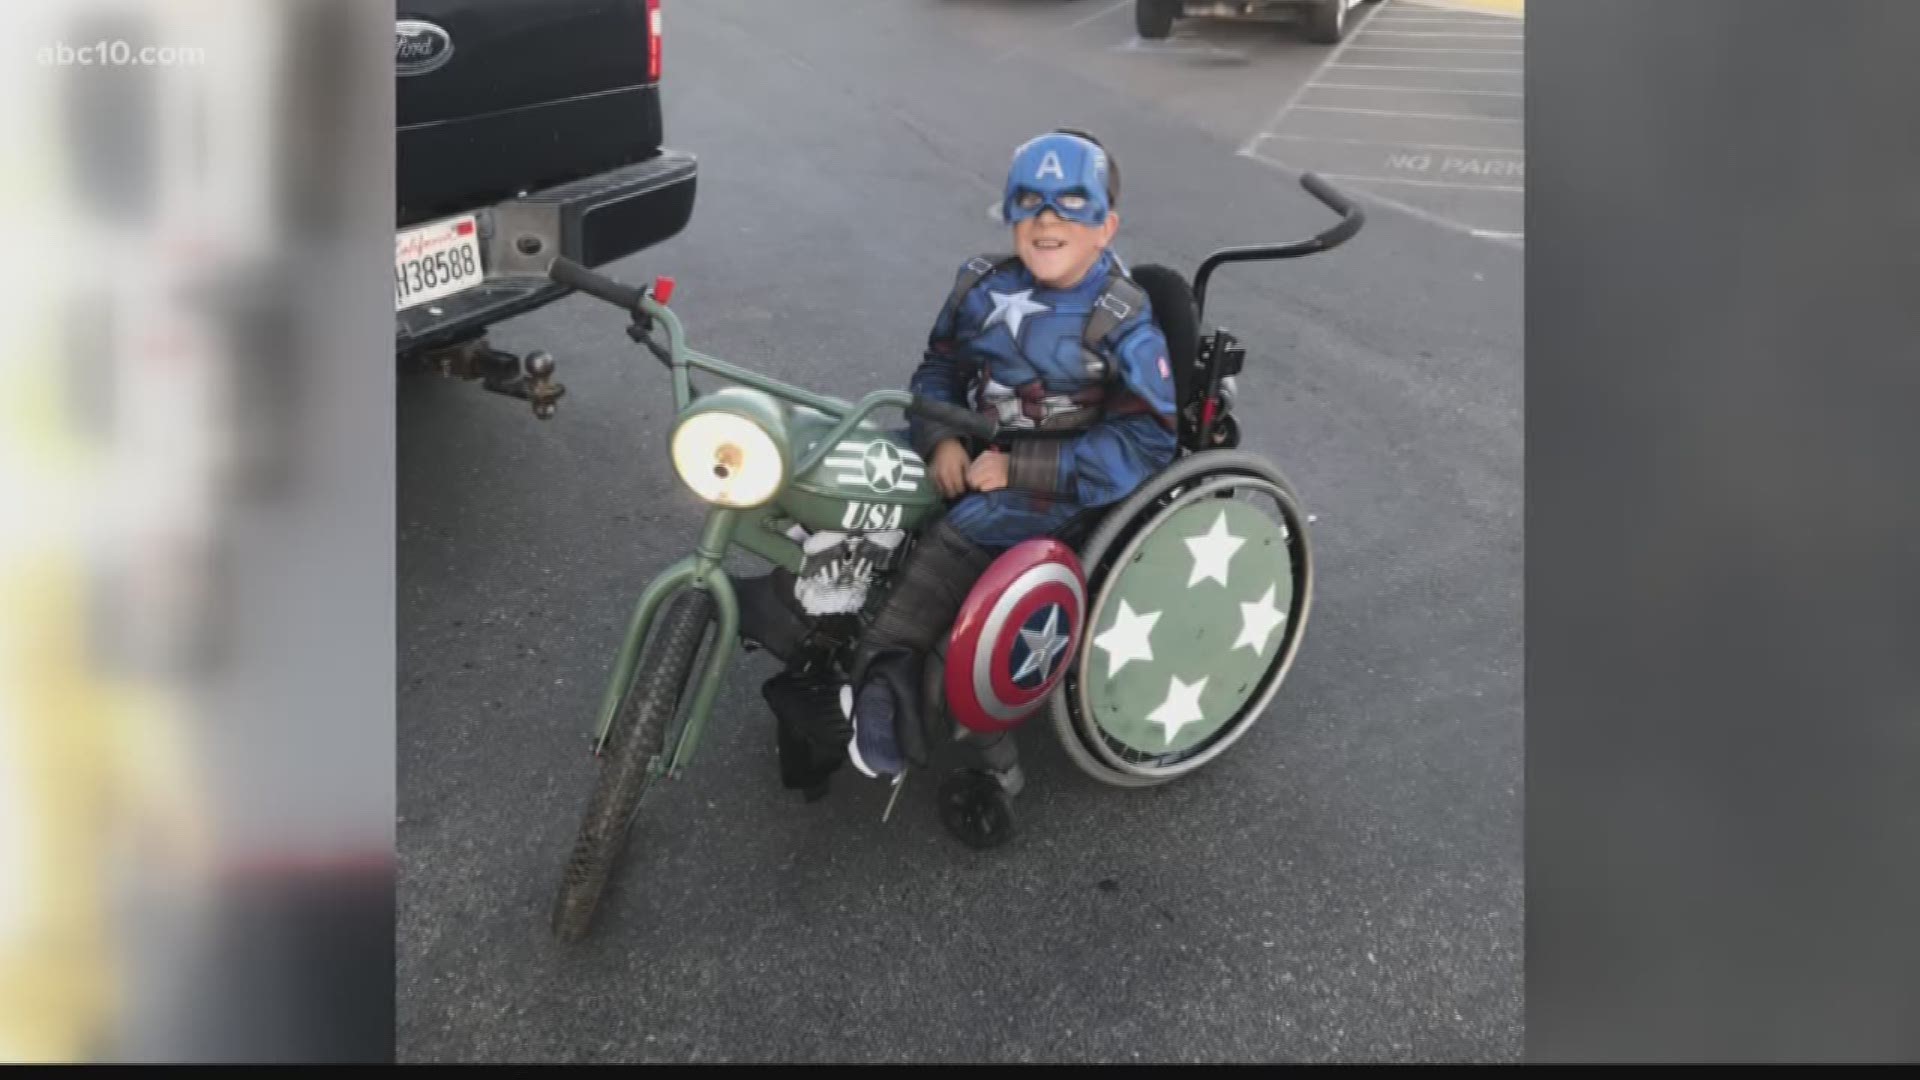 Nine-year-old Tommy Loredo junior was born with a muscle condition that stiffens his joints making it hard to walk but his father is on a mission to make trick or treating a fun experience. (Oct. 30, 2017)